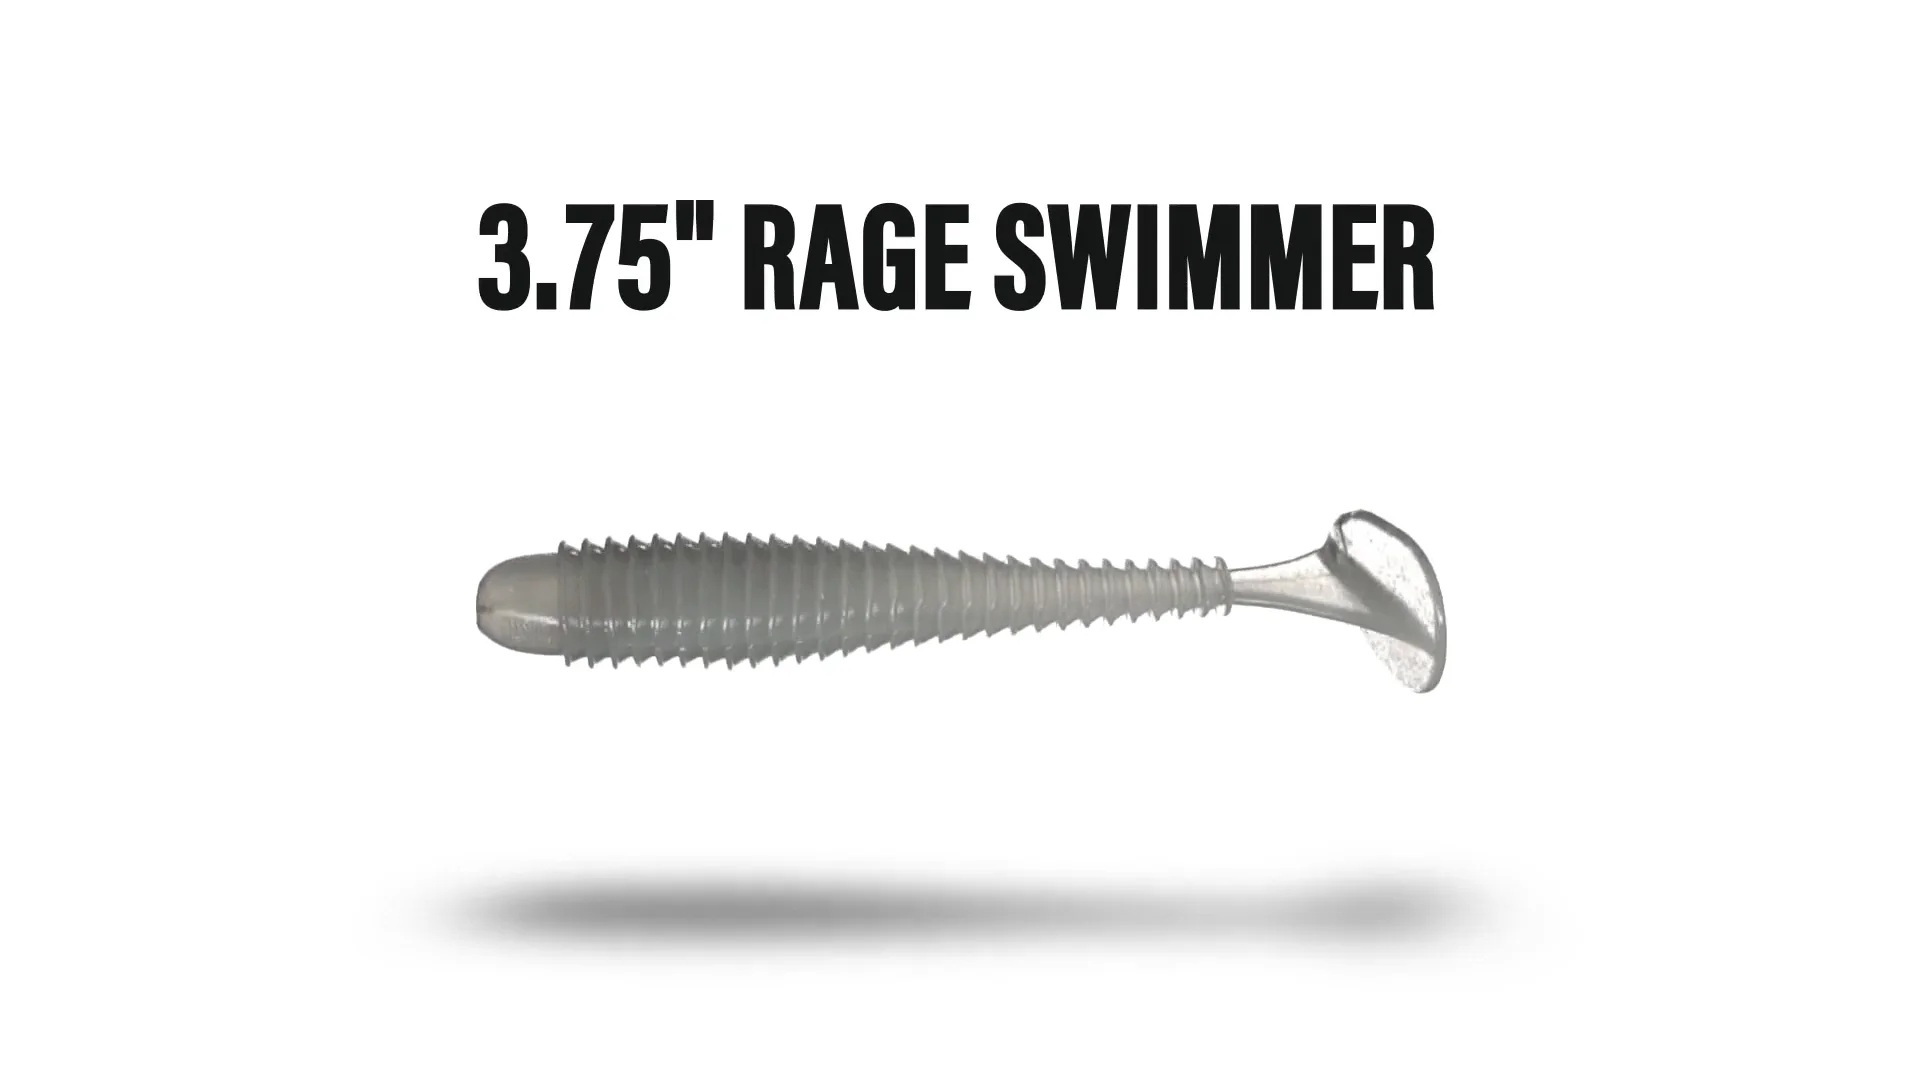 Strike King - Rage Swimmer 3 3/4 inch - Product Features on Vimeo